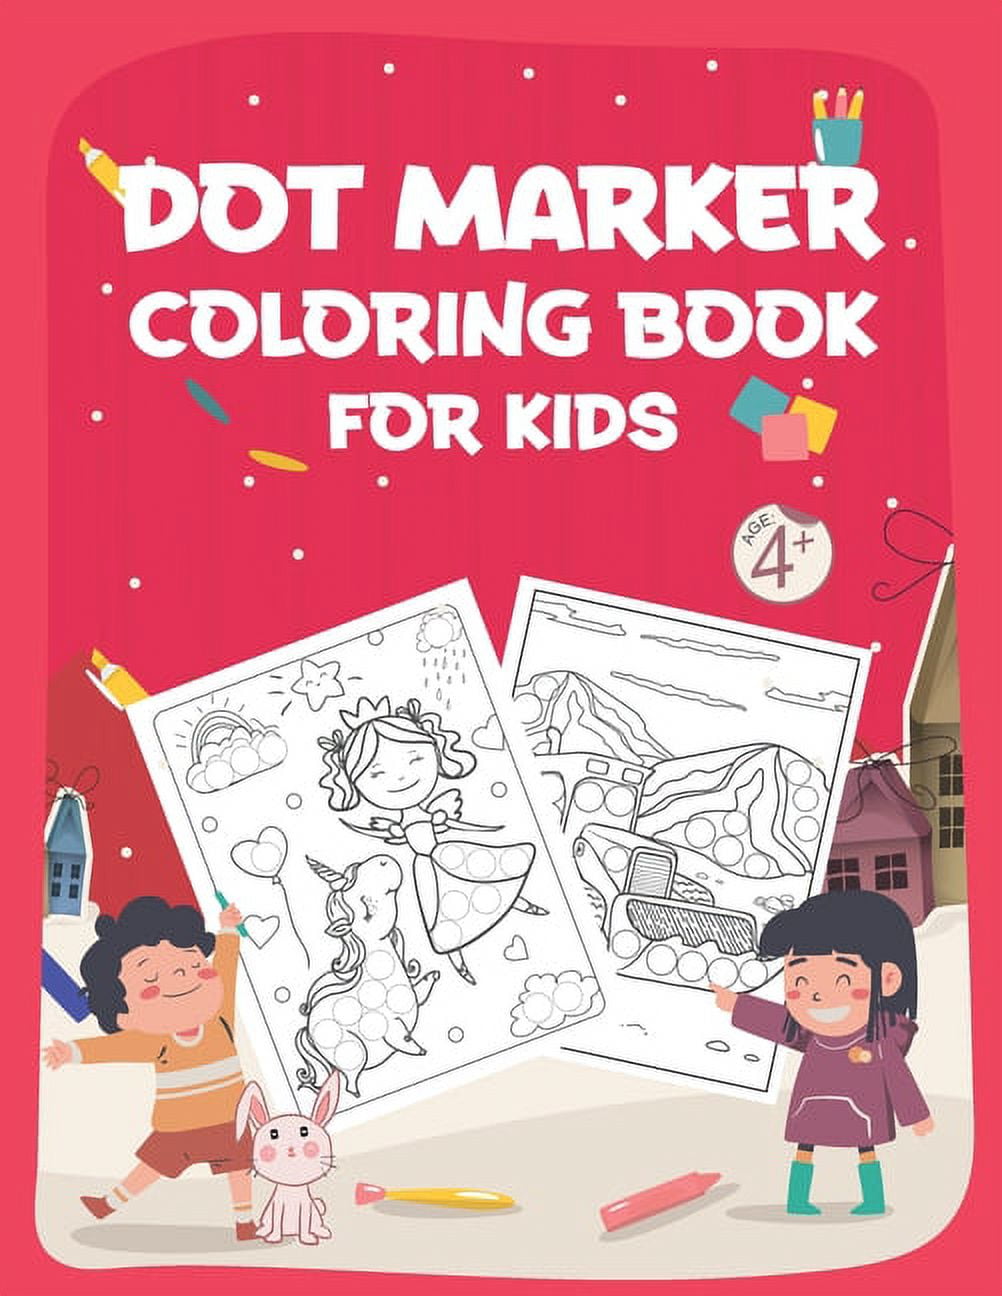 Cute Animals Dot Markers Activity Book for Toddlers: A Fun and Relaxing Do  a Dot Pages for Kids Ages 2-5. Creative and easy Guided Big Dots Coloring I  (Paperback)